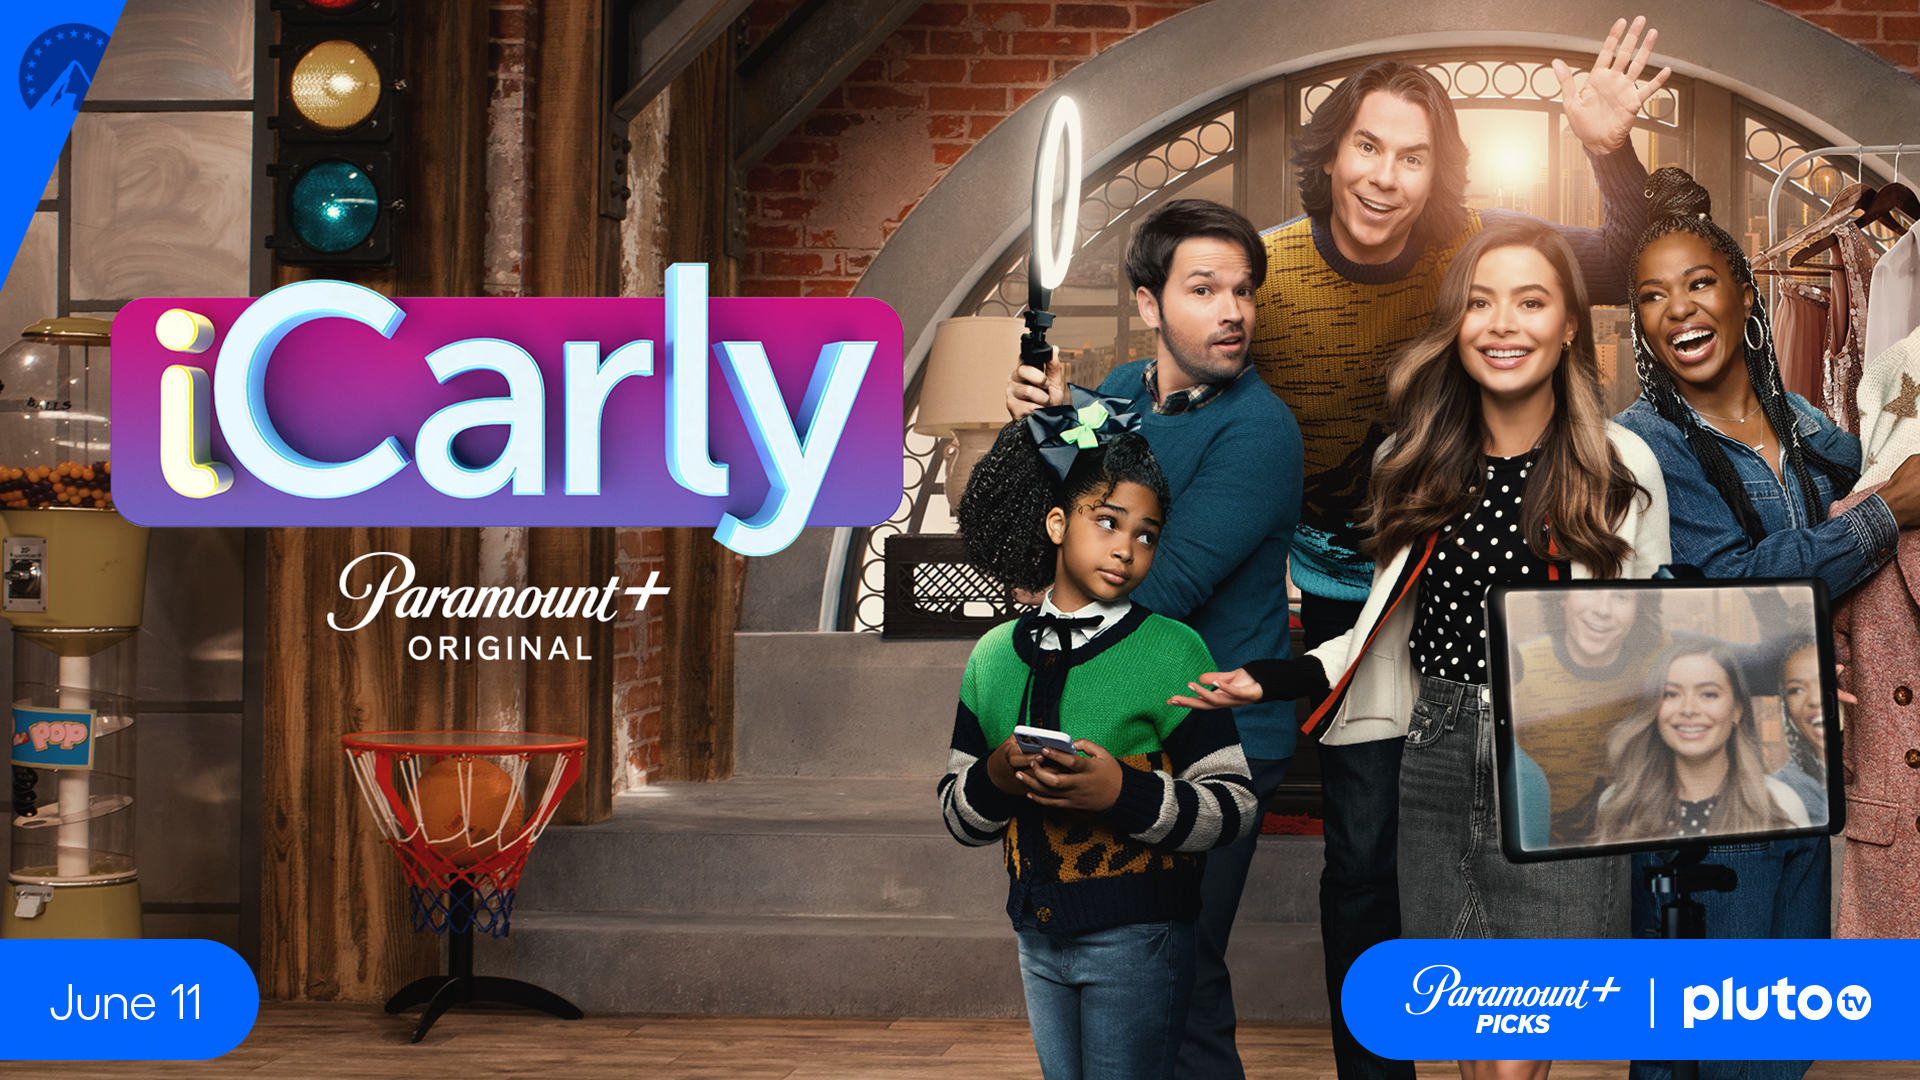 Twitter 上的pluto Tv Wake Up All Members Of Icarly Nation It S Your Time To Be While You Wait For The Icarly Reboot On Paramountplus Watch Plutotv S Free Sampling Of The Icarly